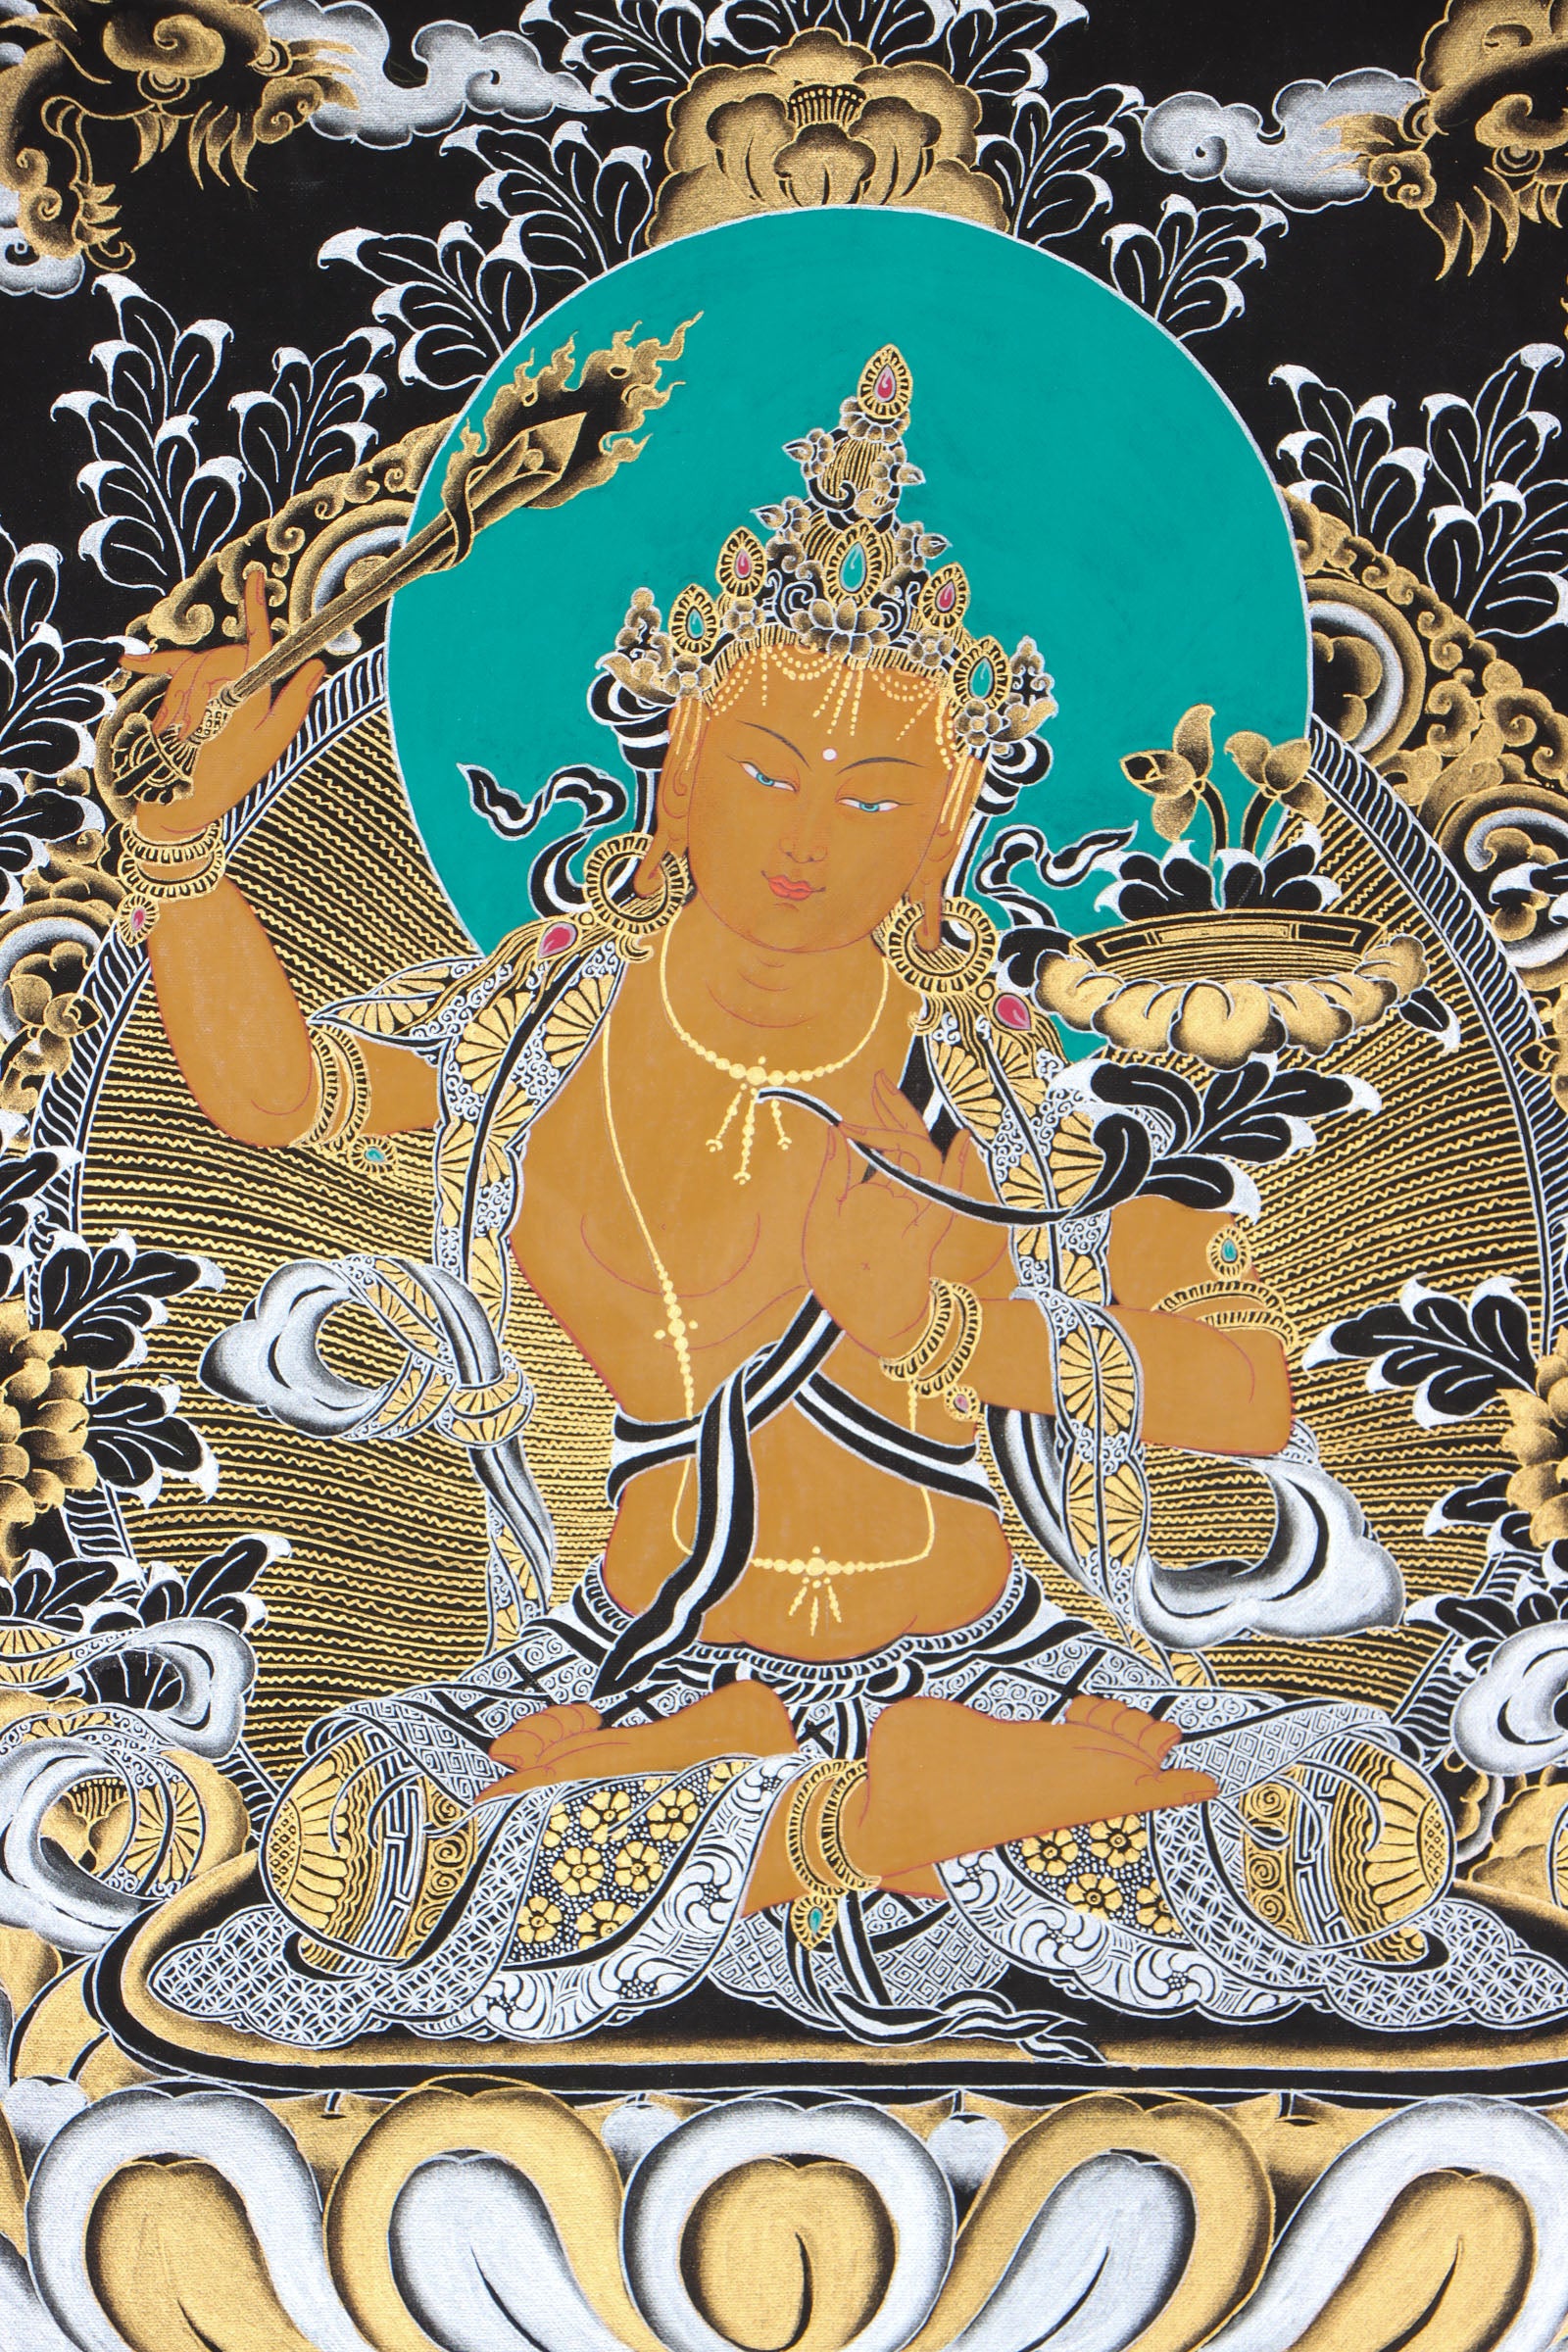 Manjushree Thangka can lead practitioners towards the path of liberation and enlightenment.